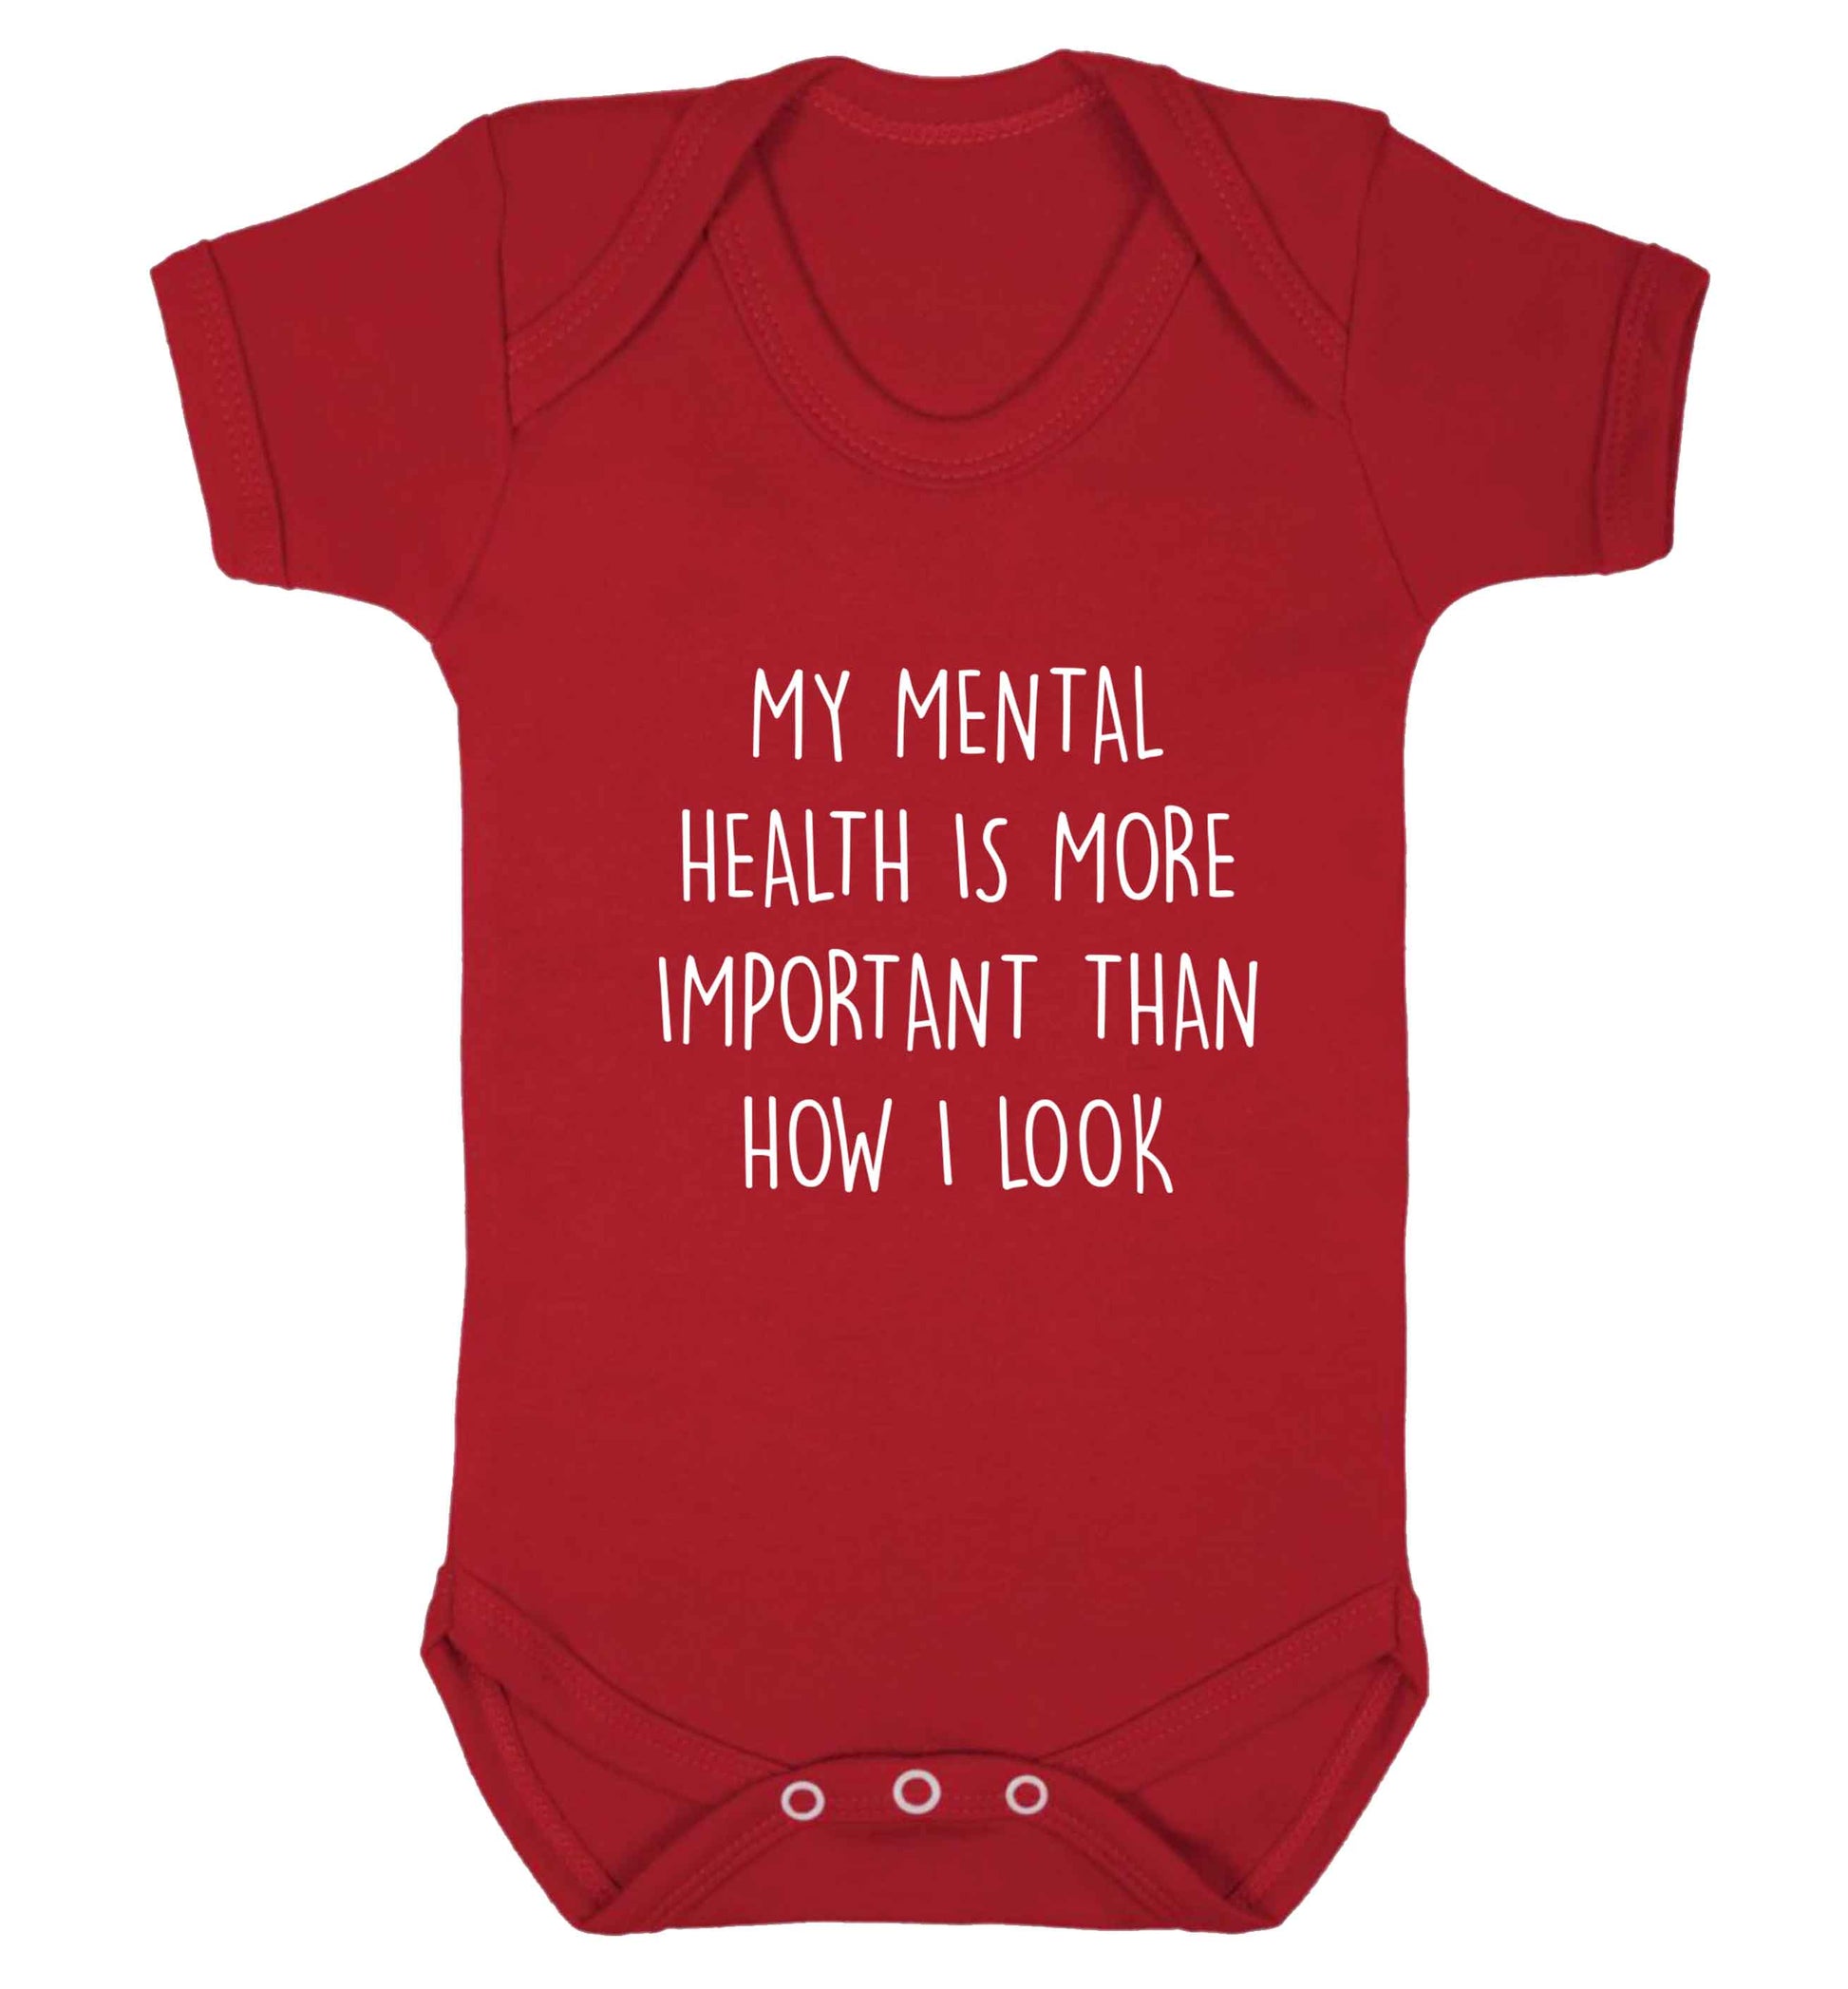 My mental health is more importnat than how I look baby vest red 18-24 months